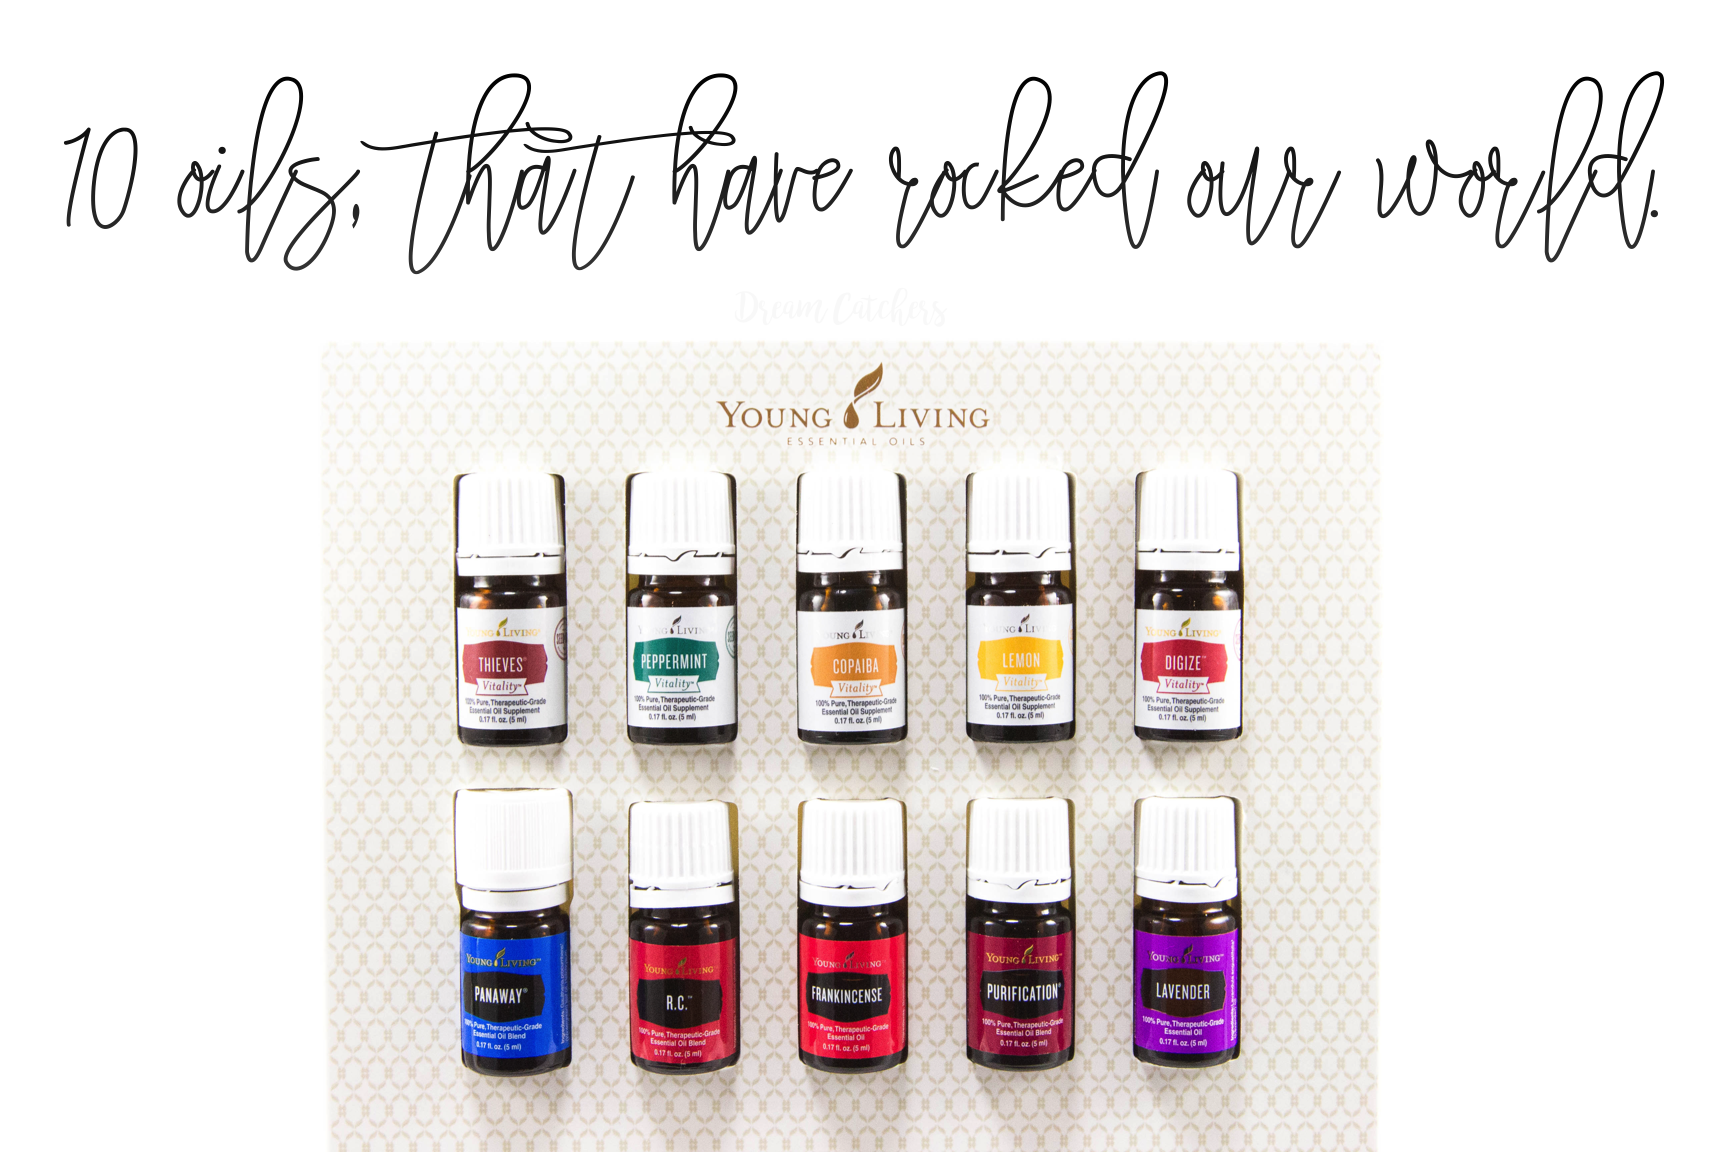 10 oils that rocked my world | Decorchick!®